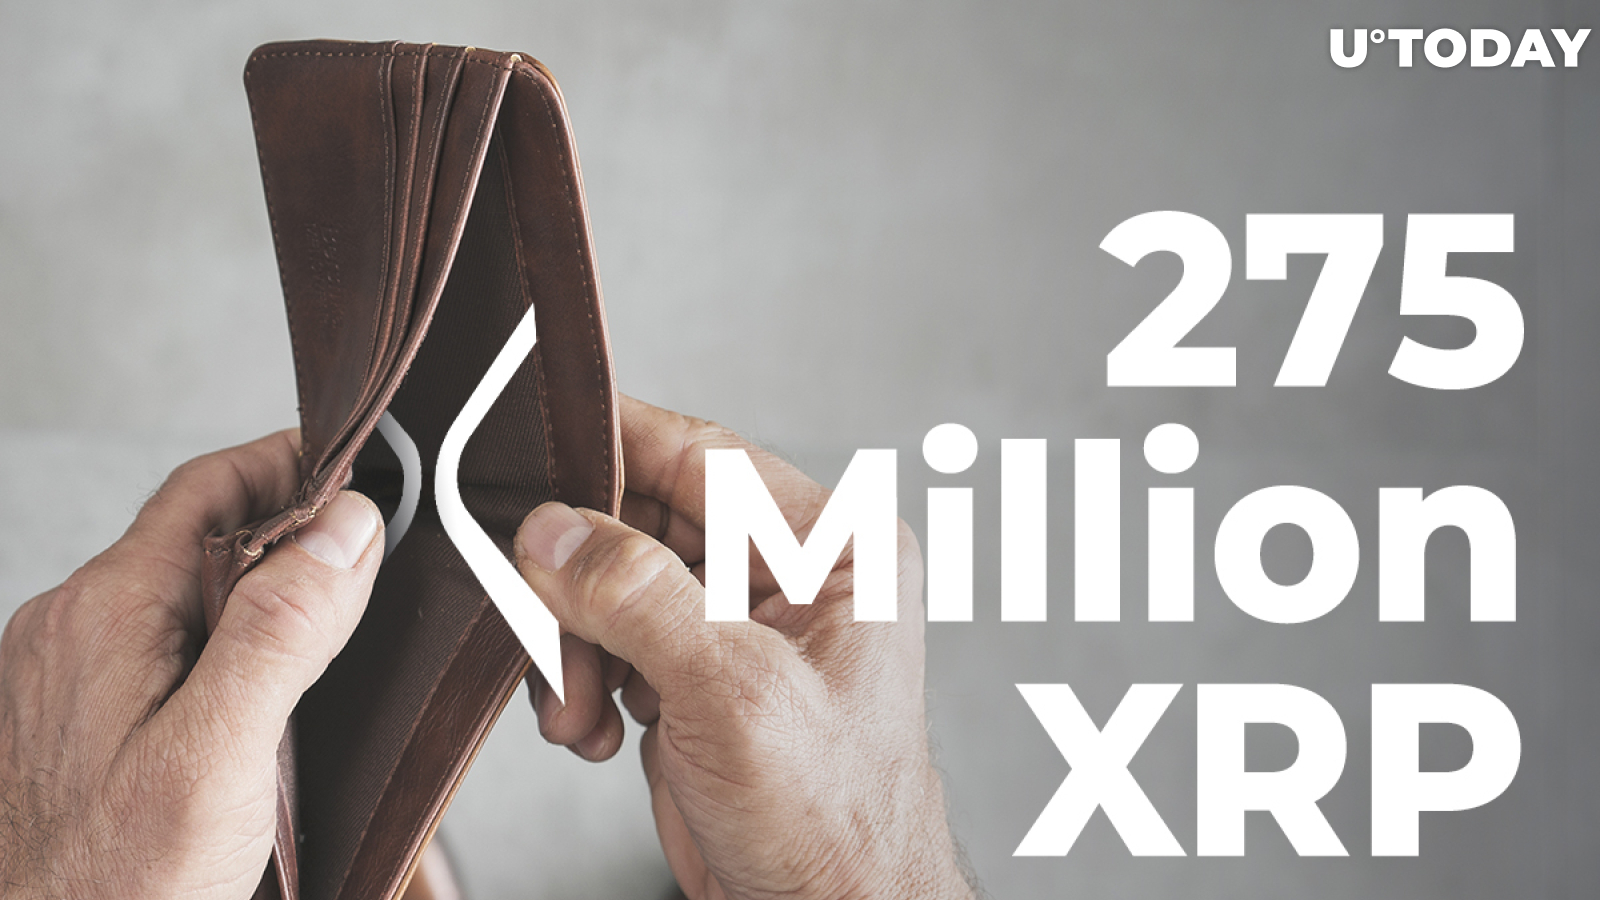 Ripple Shifts 275 Million XRP, Over Half Goes to Jed McCaleb's Wallet